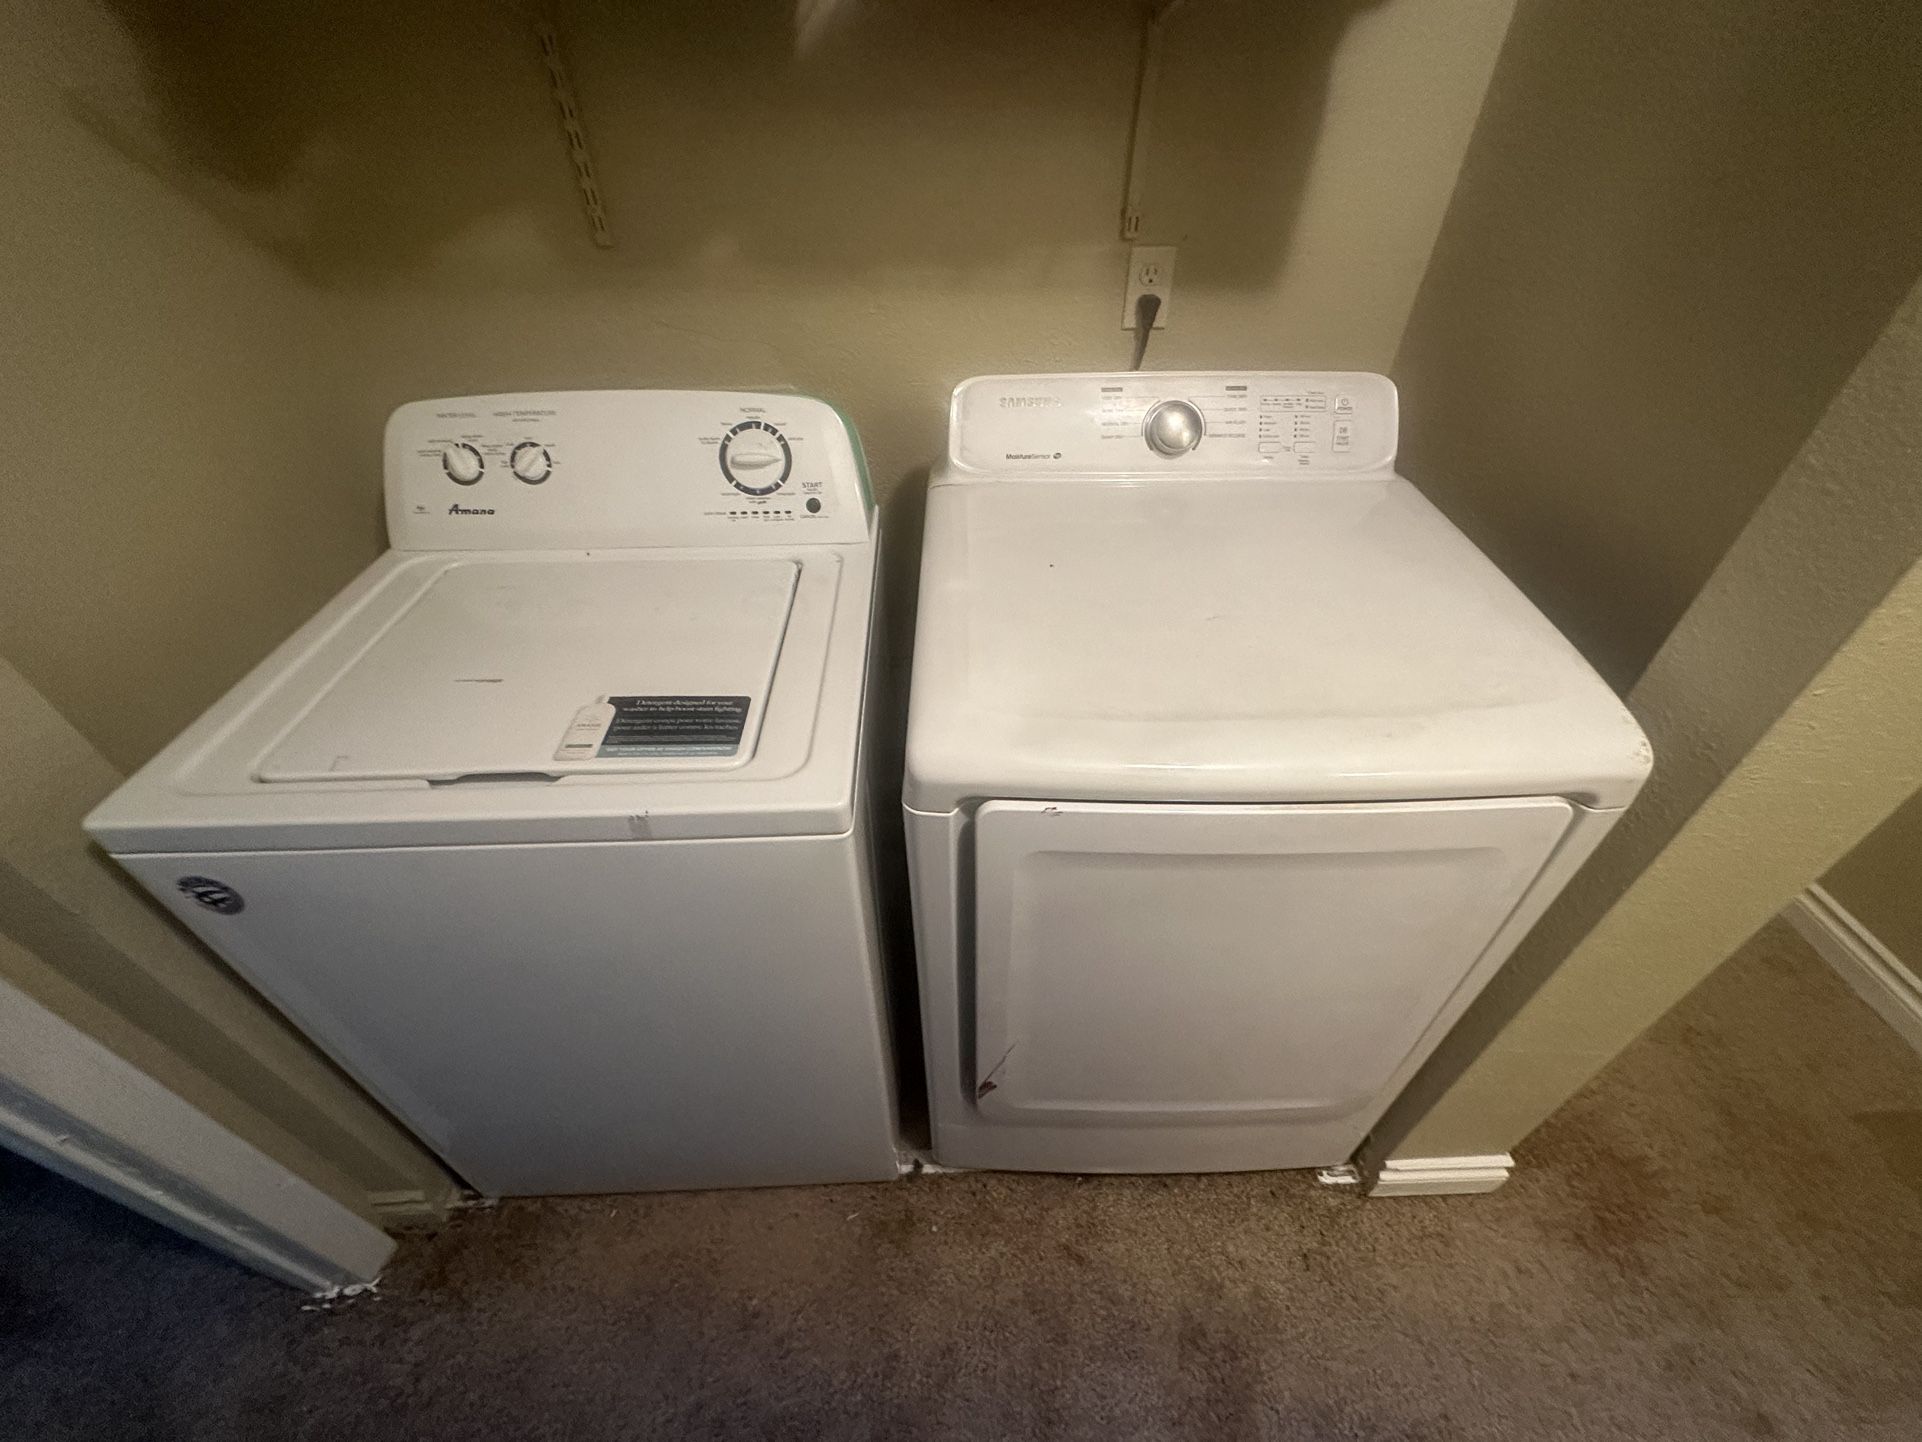 PRICED TO SELL $400 FOR PAIR Amana Washer And Samsung Dryer